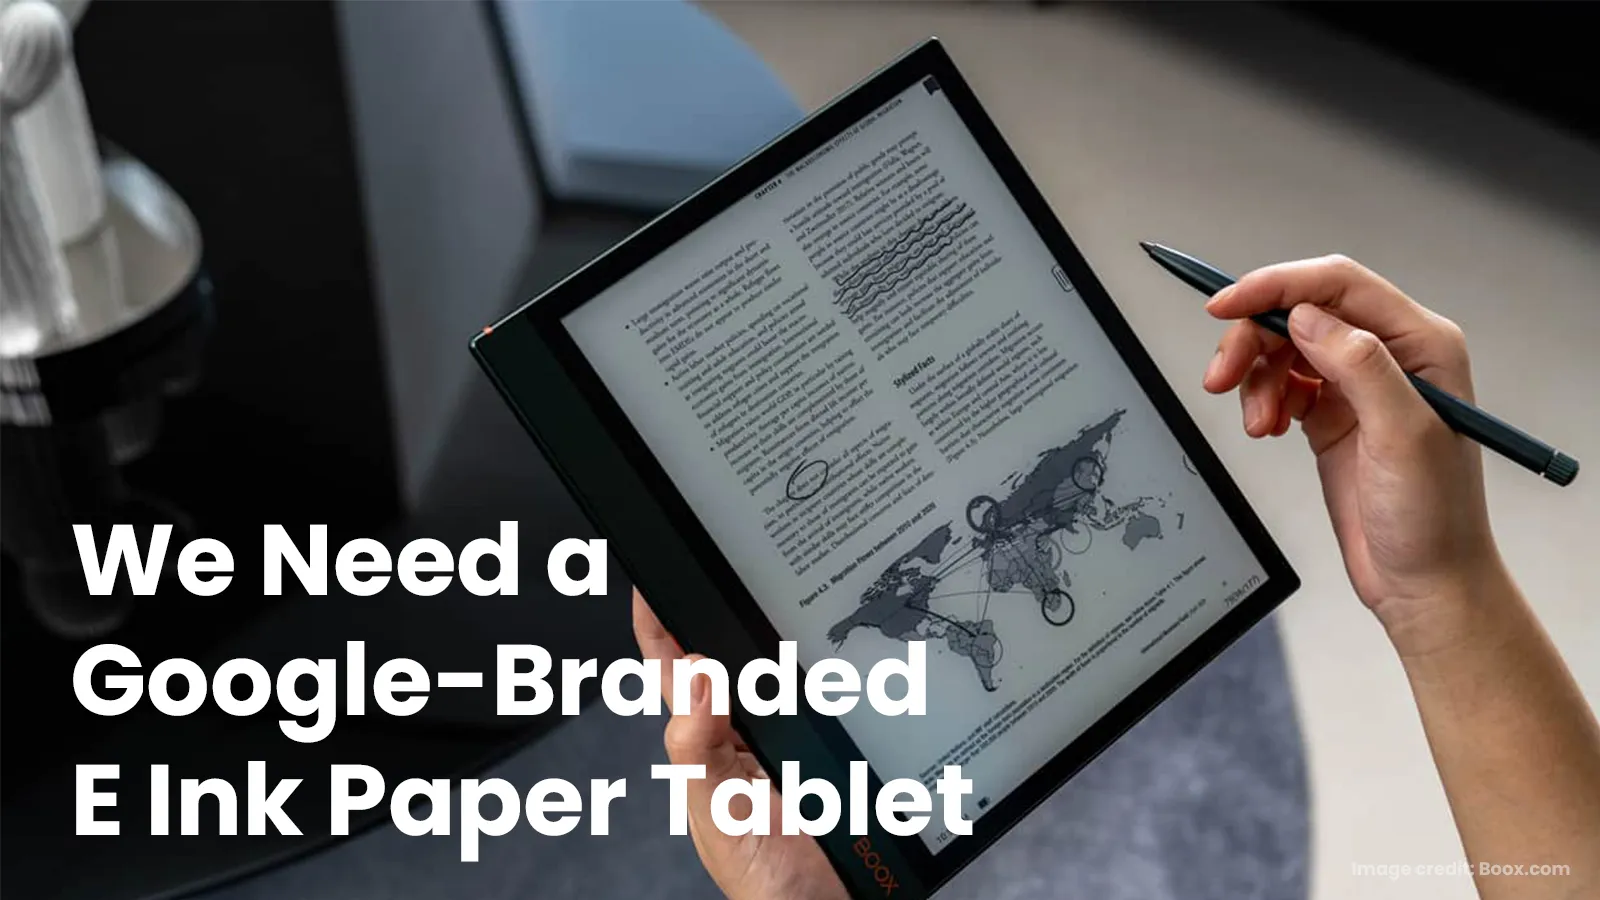 Now, more than ever, I want a Google-branded E Ink paper tablet, but it’s unlikely to happen